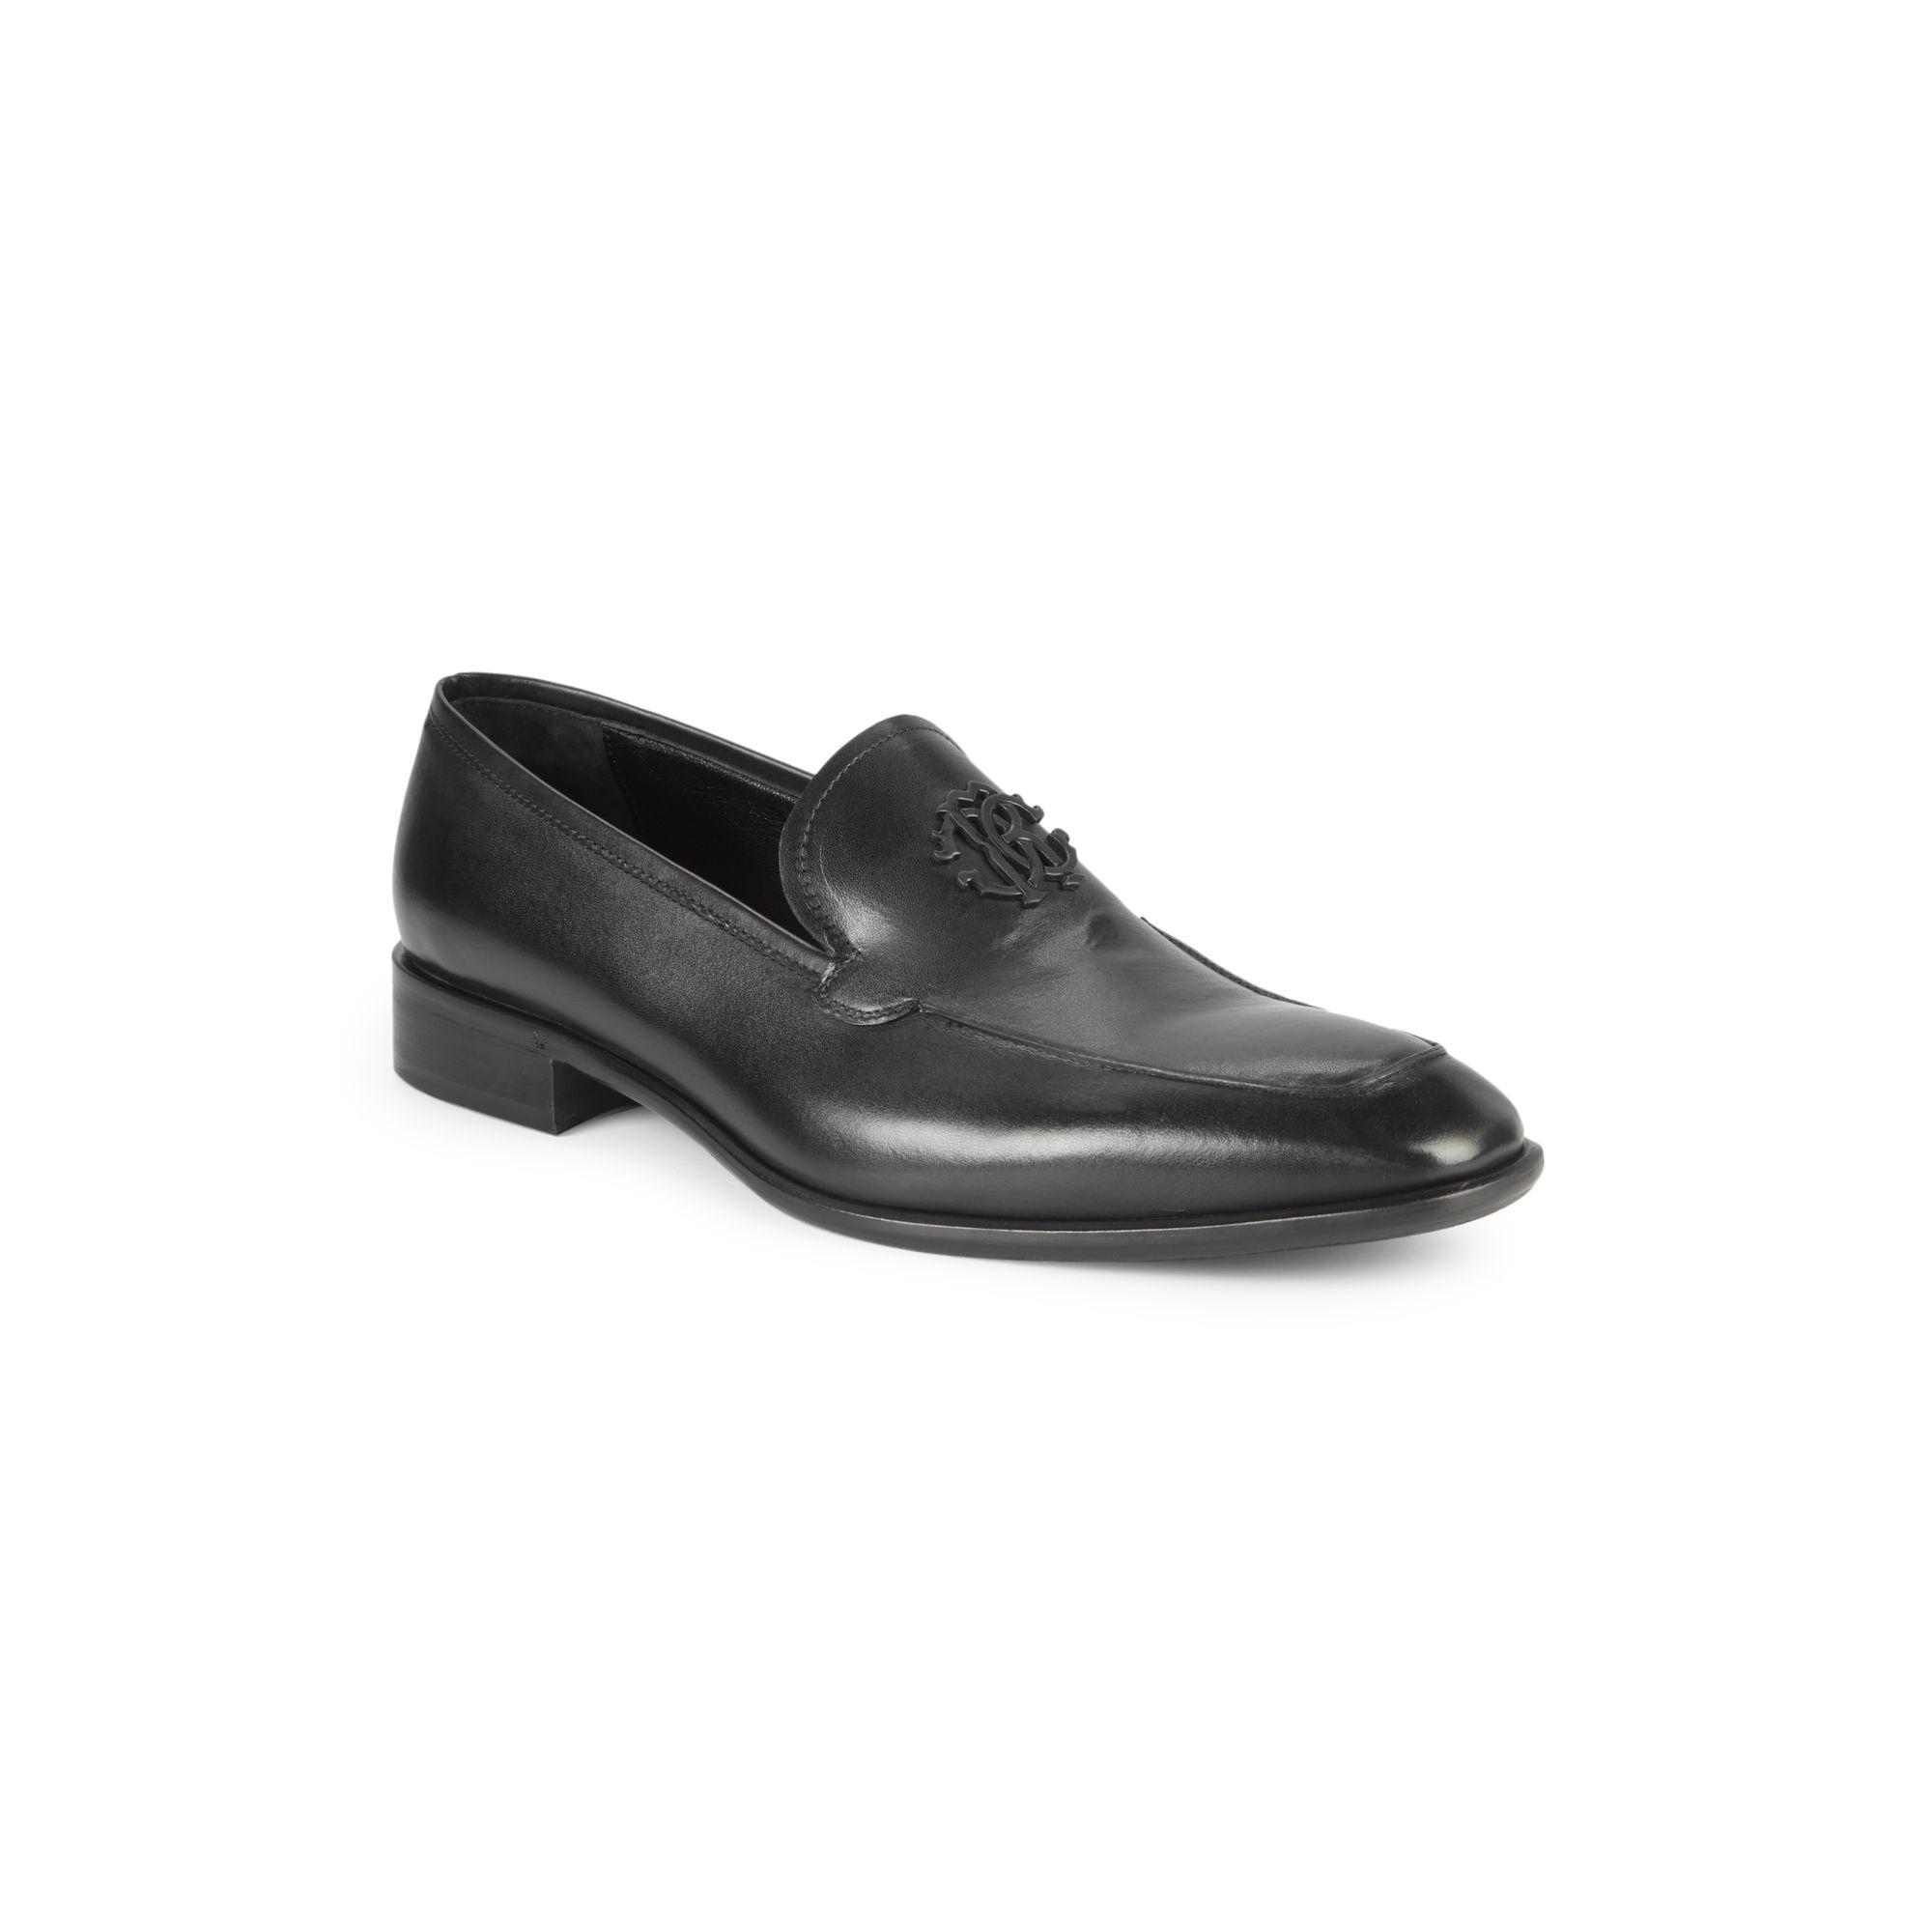 Roberto Cavalli Firenze Leather Loafers in Black for Men - Lyst